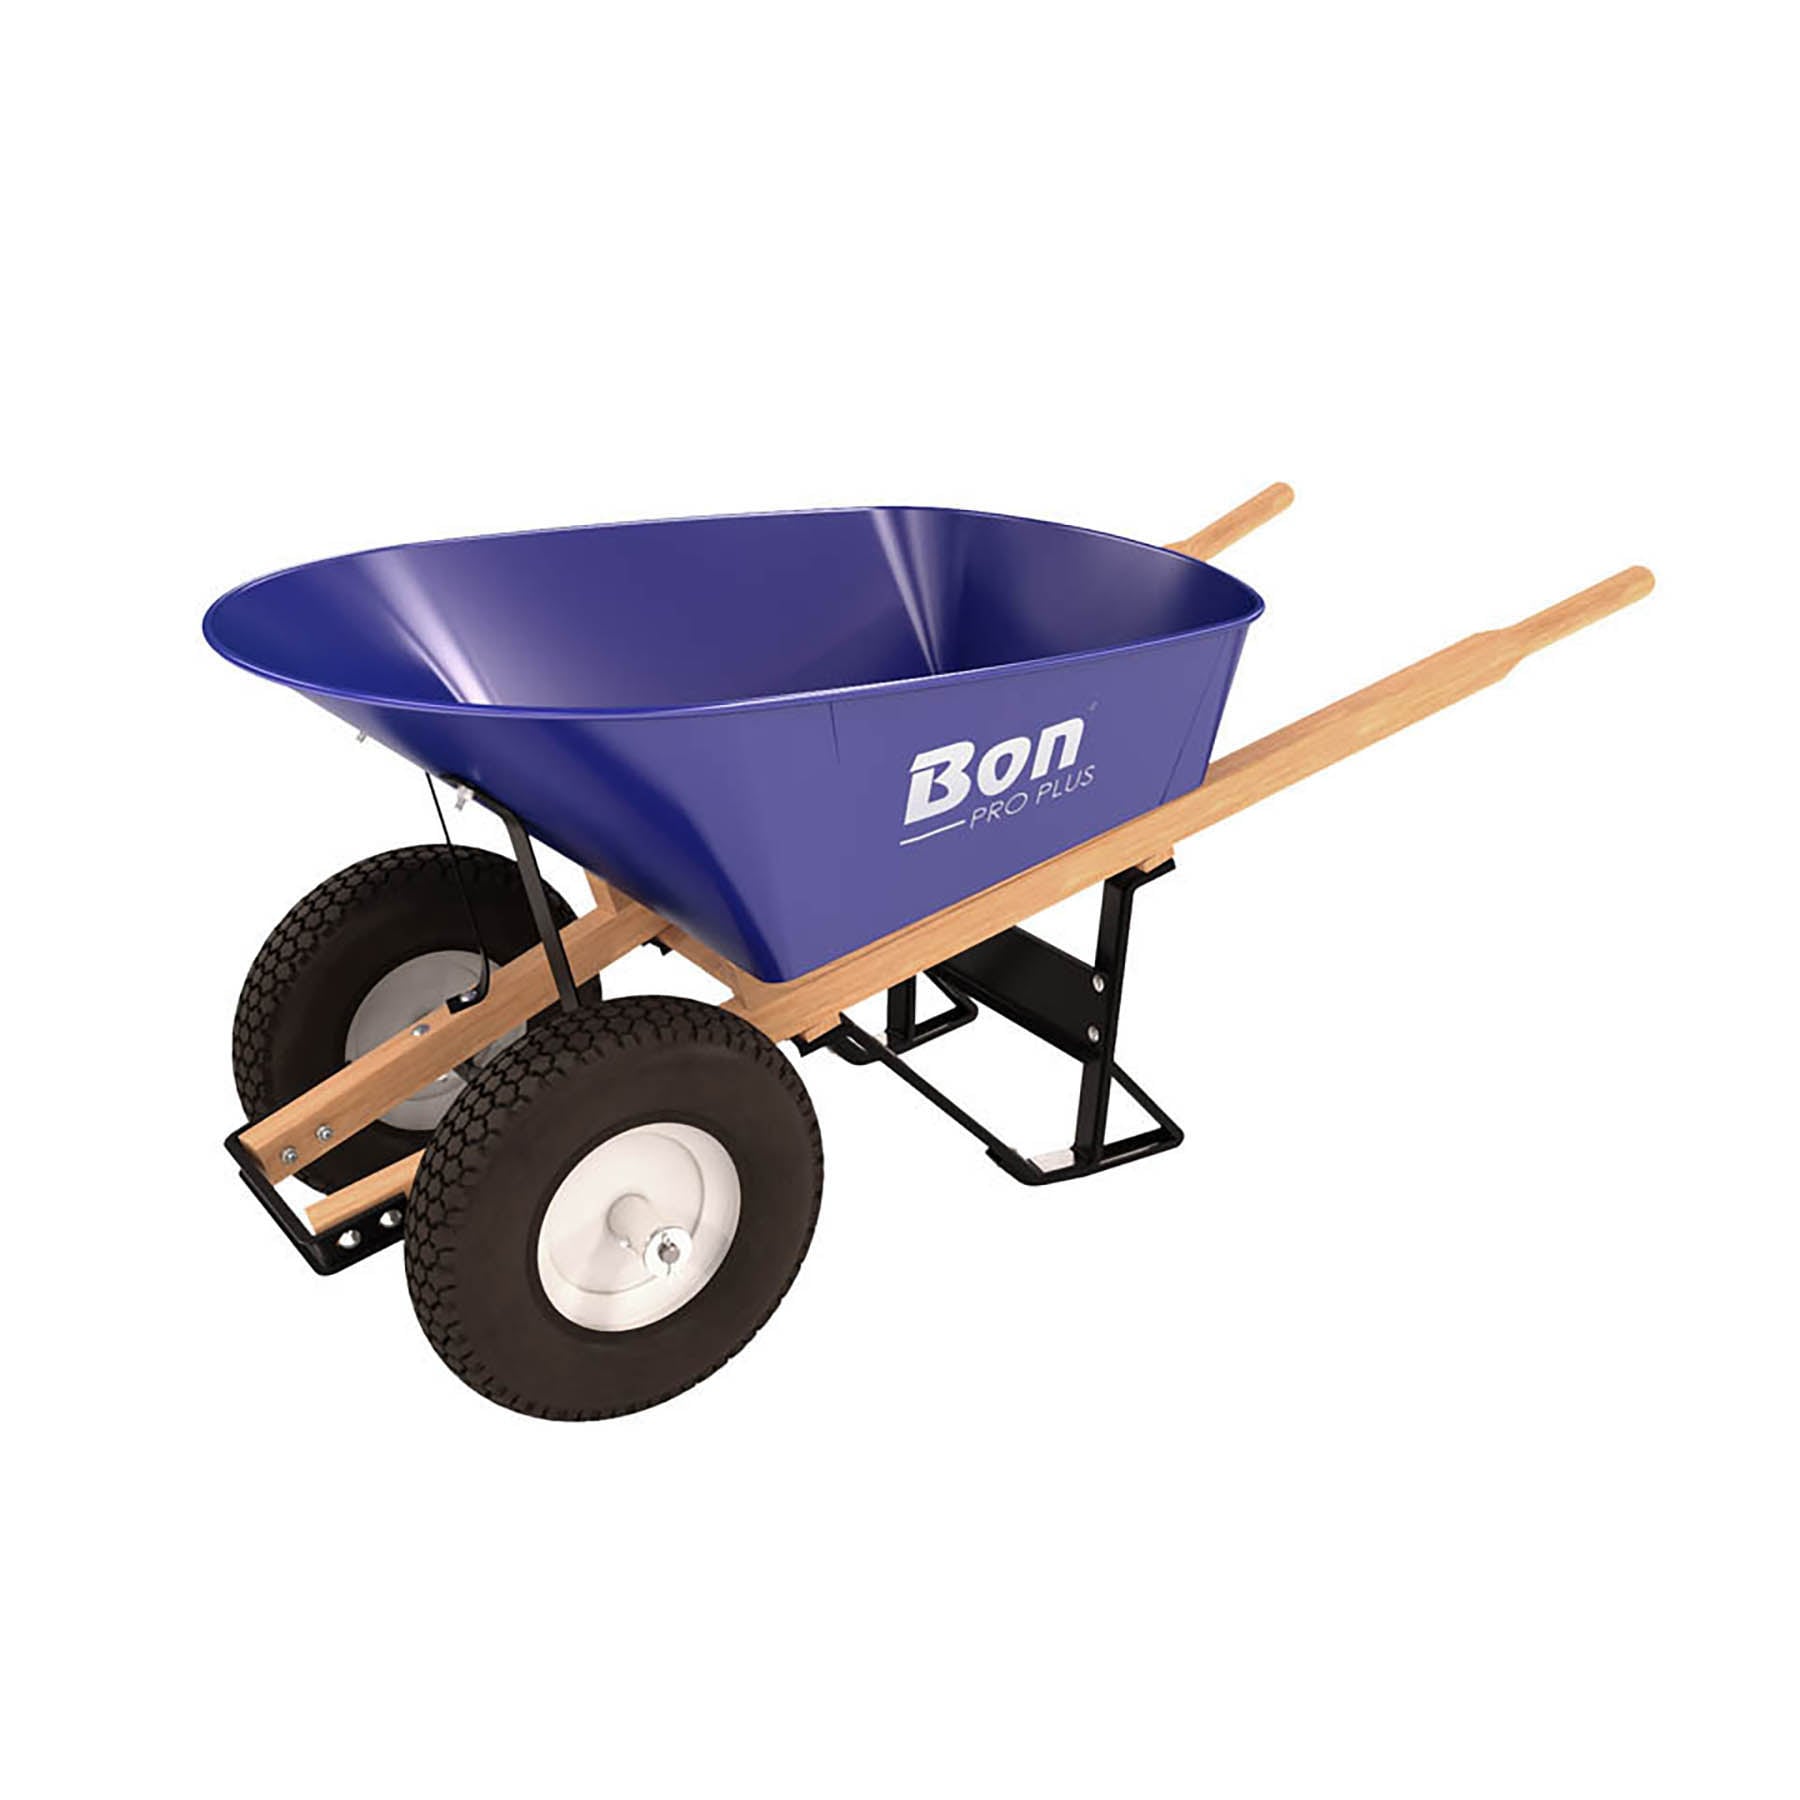 Wooden Wheelbarrow Plans - MyOutdoorPlans - Free Woodworking Plans and  Projects, DIY Shed, Wooden Playhouse, Pergola, Bbq